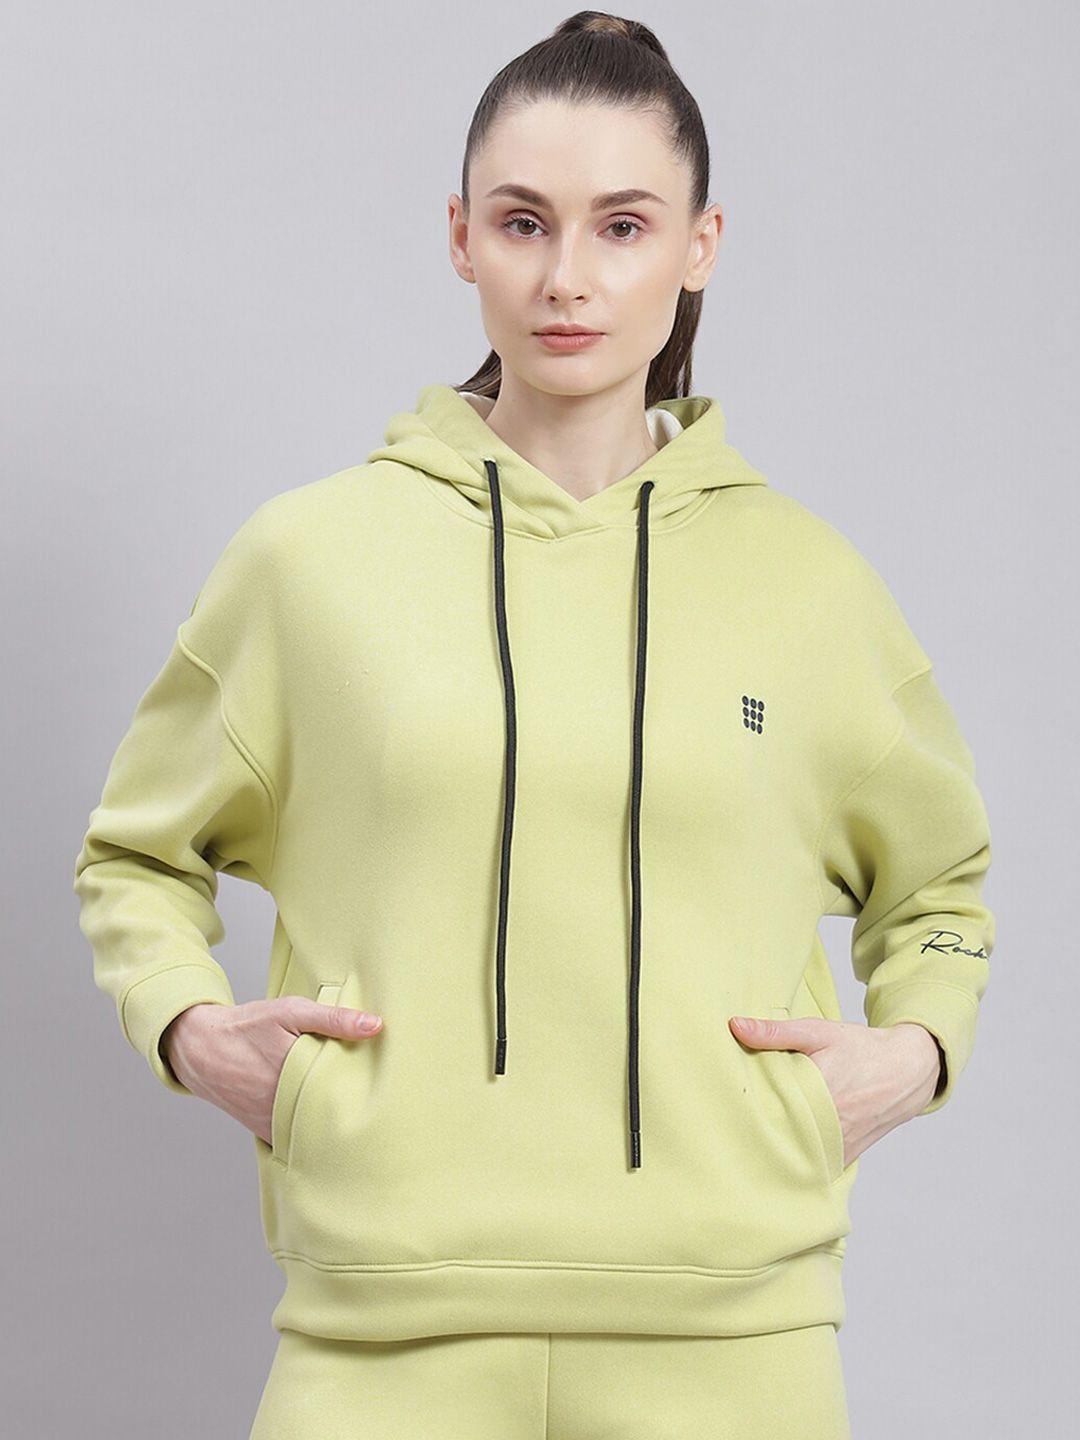 rock.it long sleeves hooded pullover